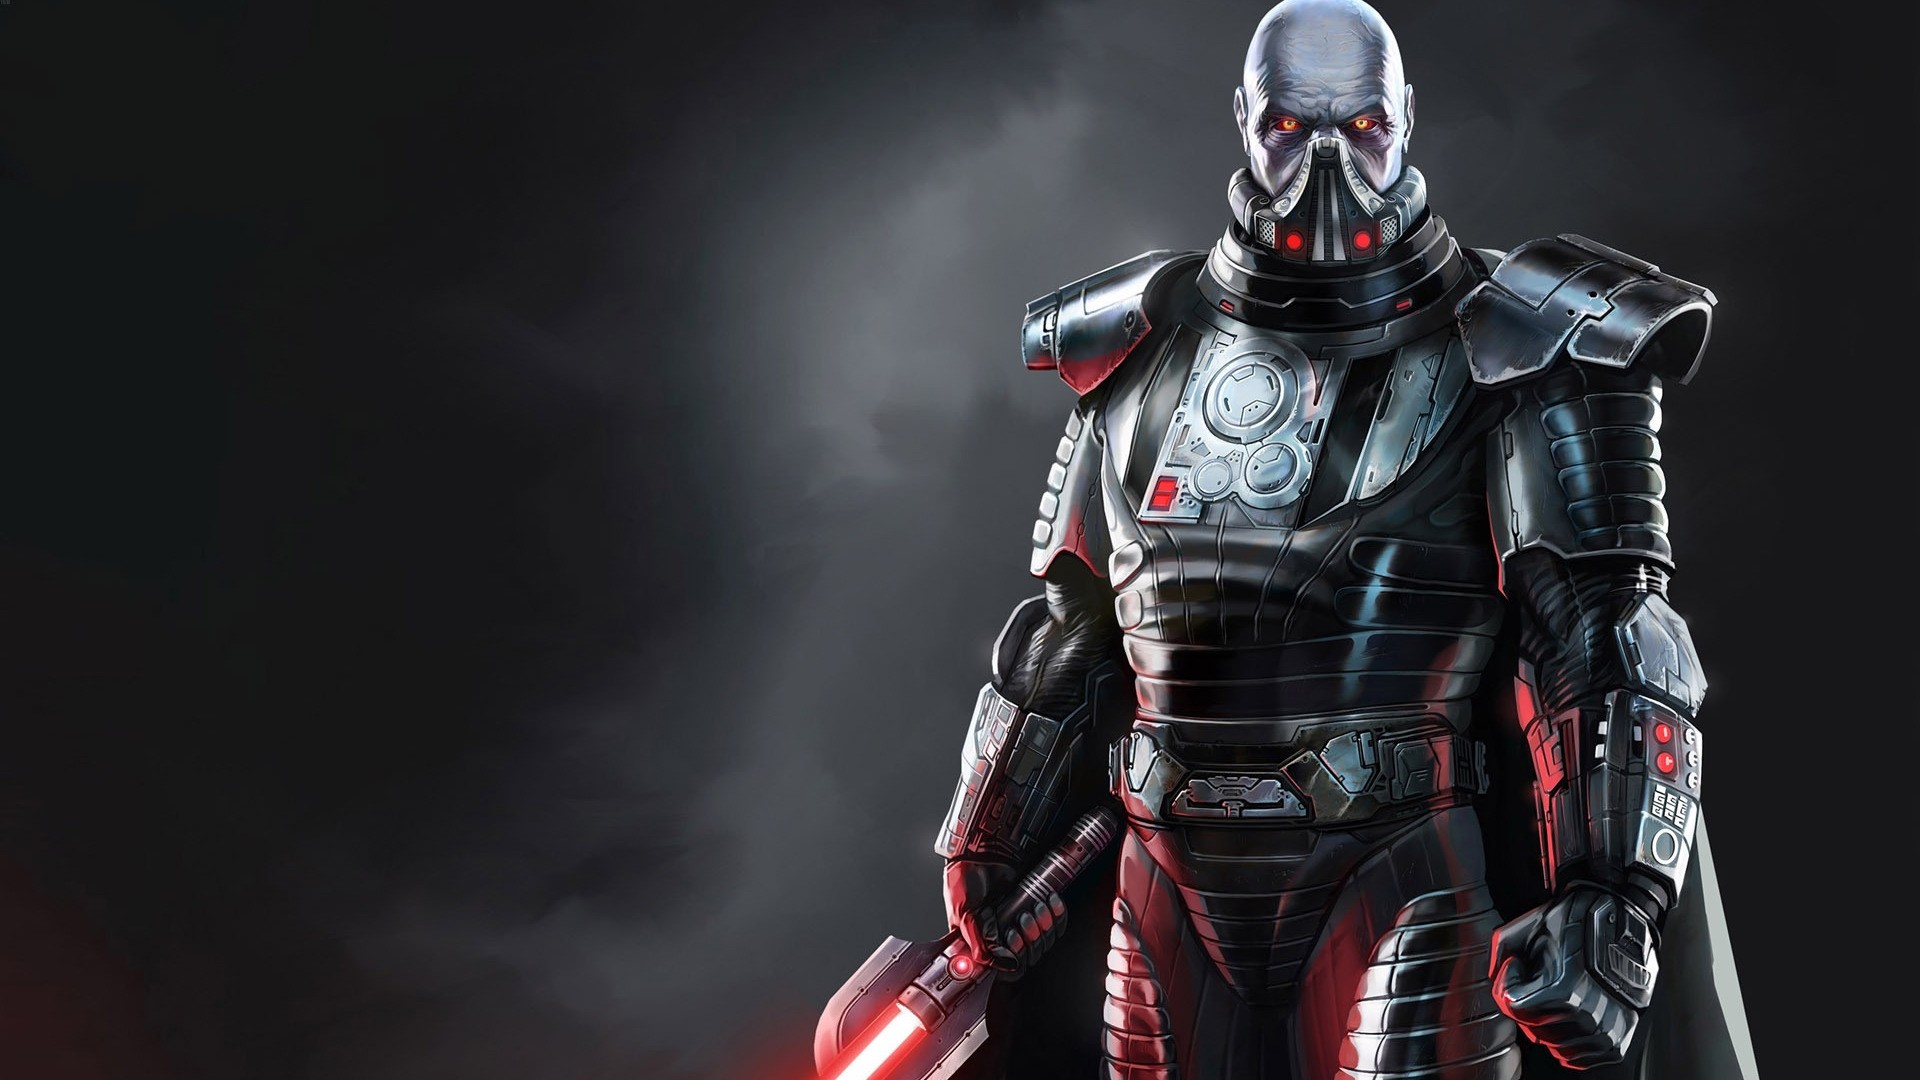 1920x1080 Star Wars Sith Wallpapers High Definition As Wallpaper HD